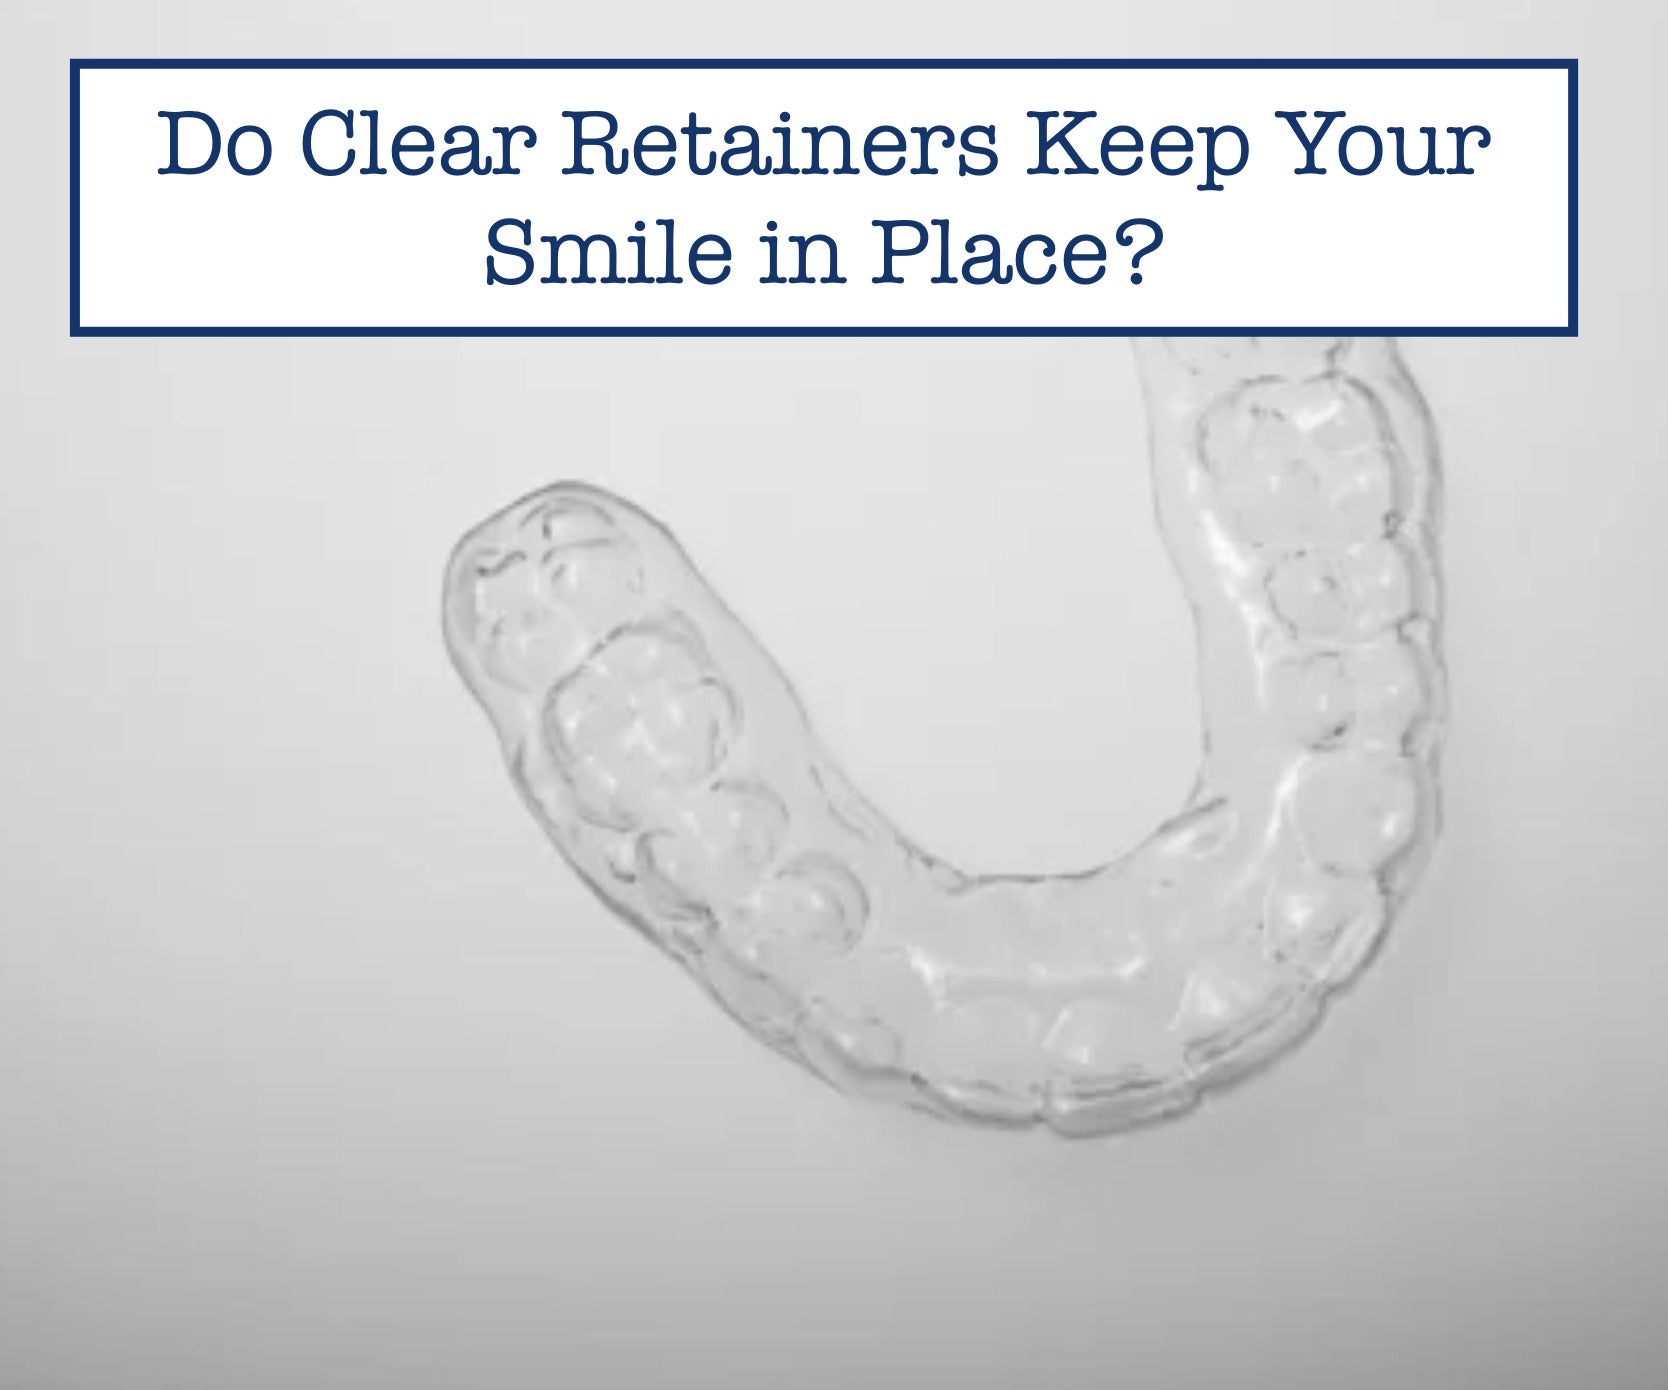 Do Clear Retainers Keep Your Smile in Place?